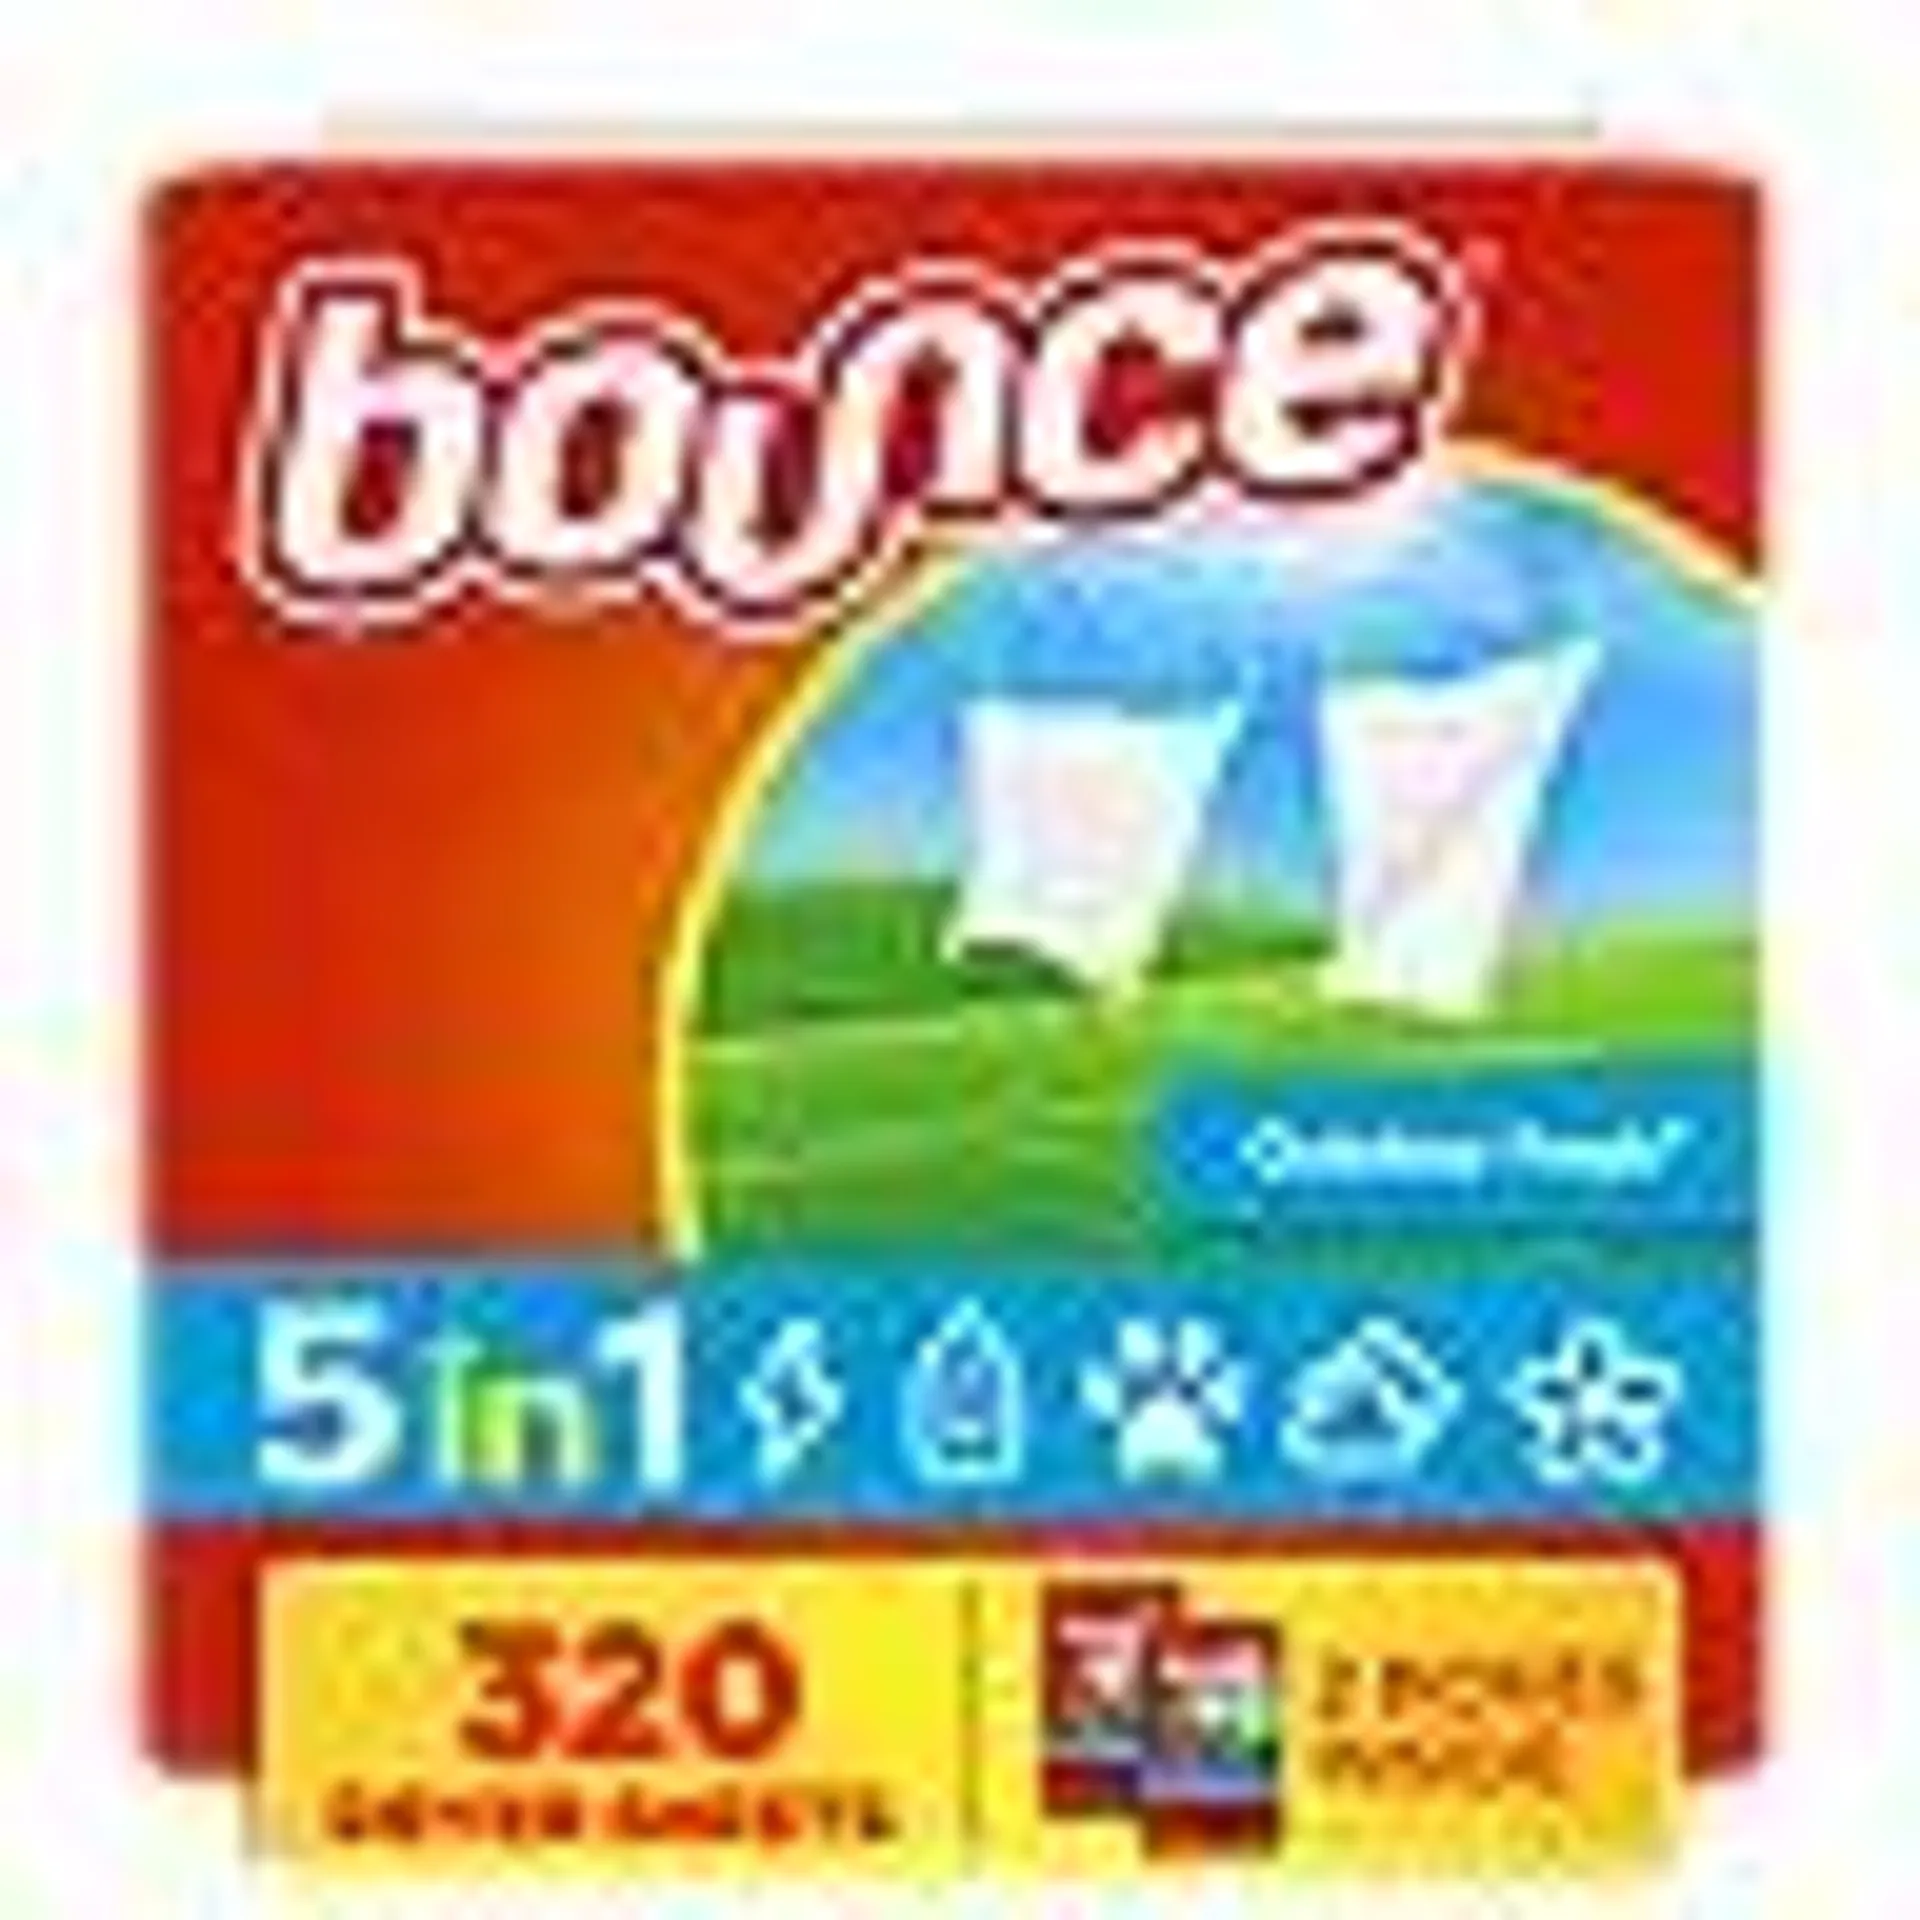 Bounce Fabric Softener Dryer Sheets, Outdoor Fresh, 320 ct.